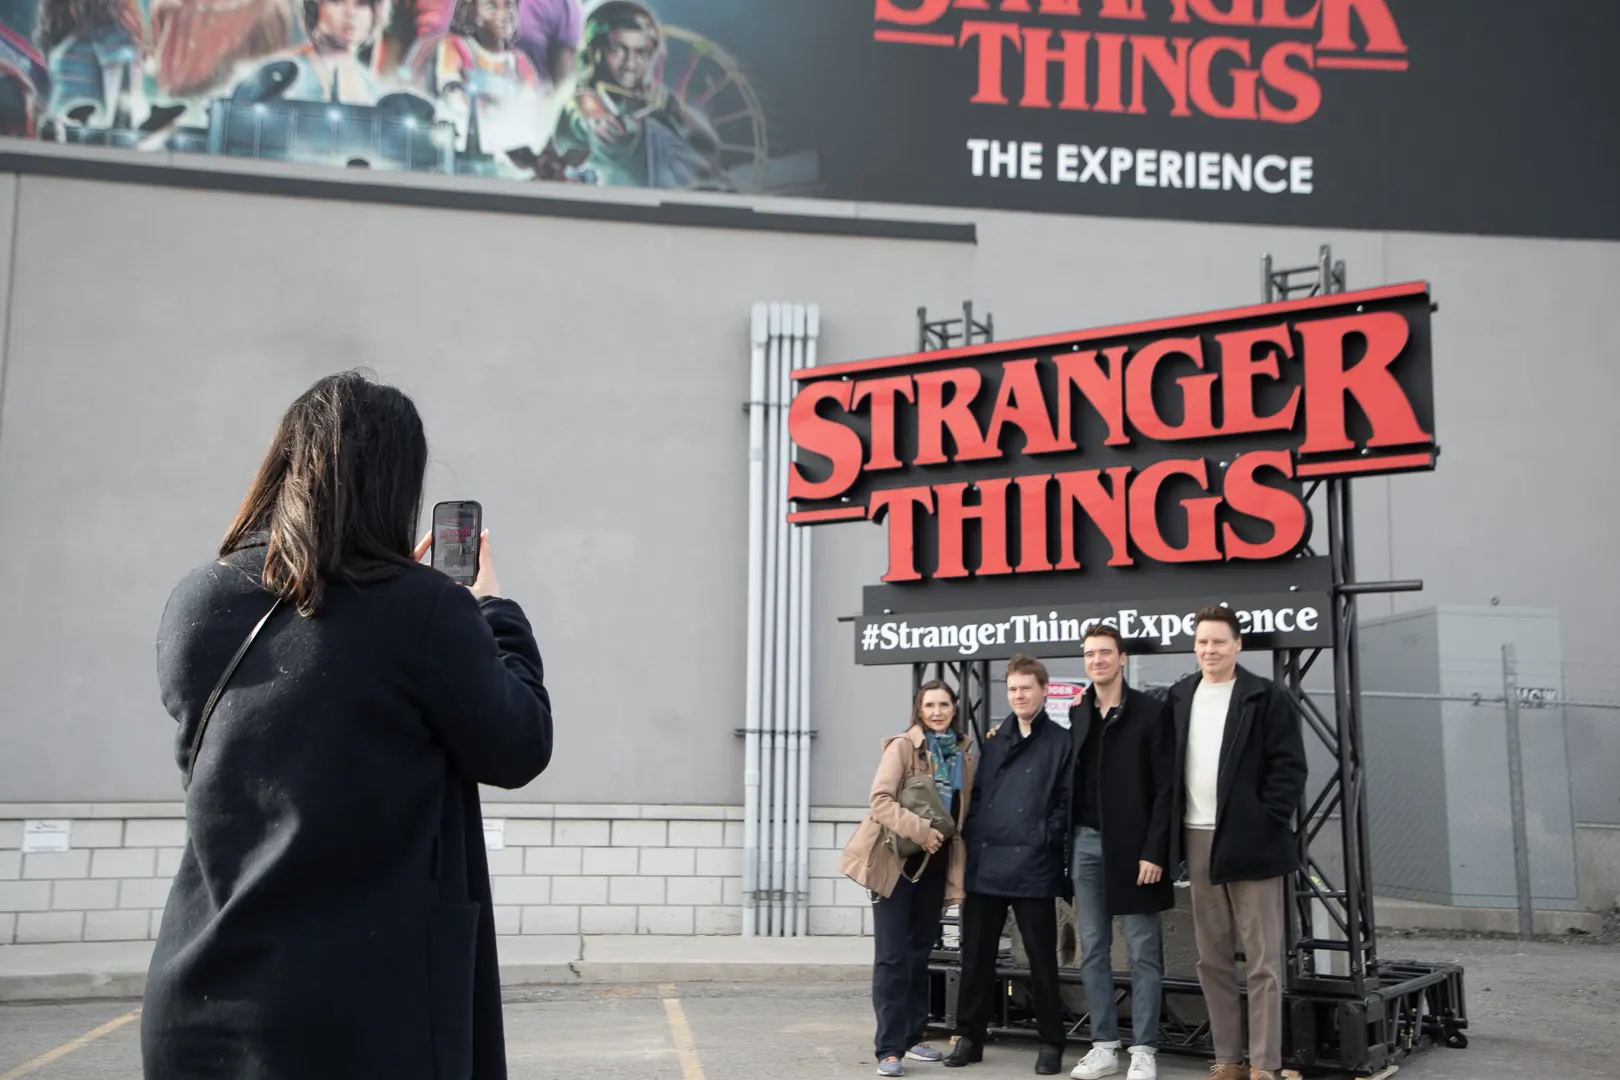 Stranger Things: The Experience Toronto - Location